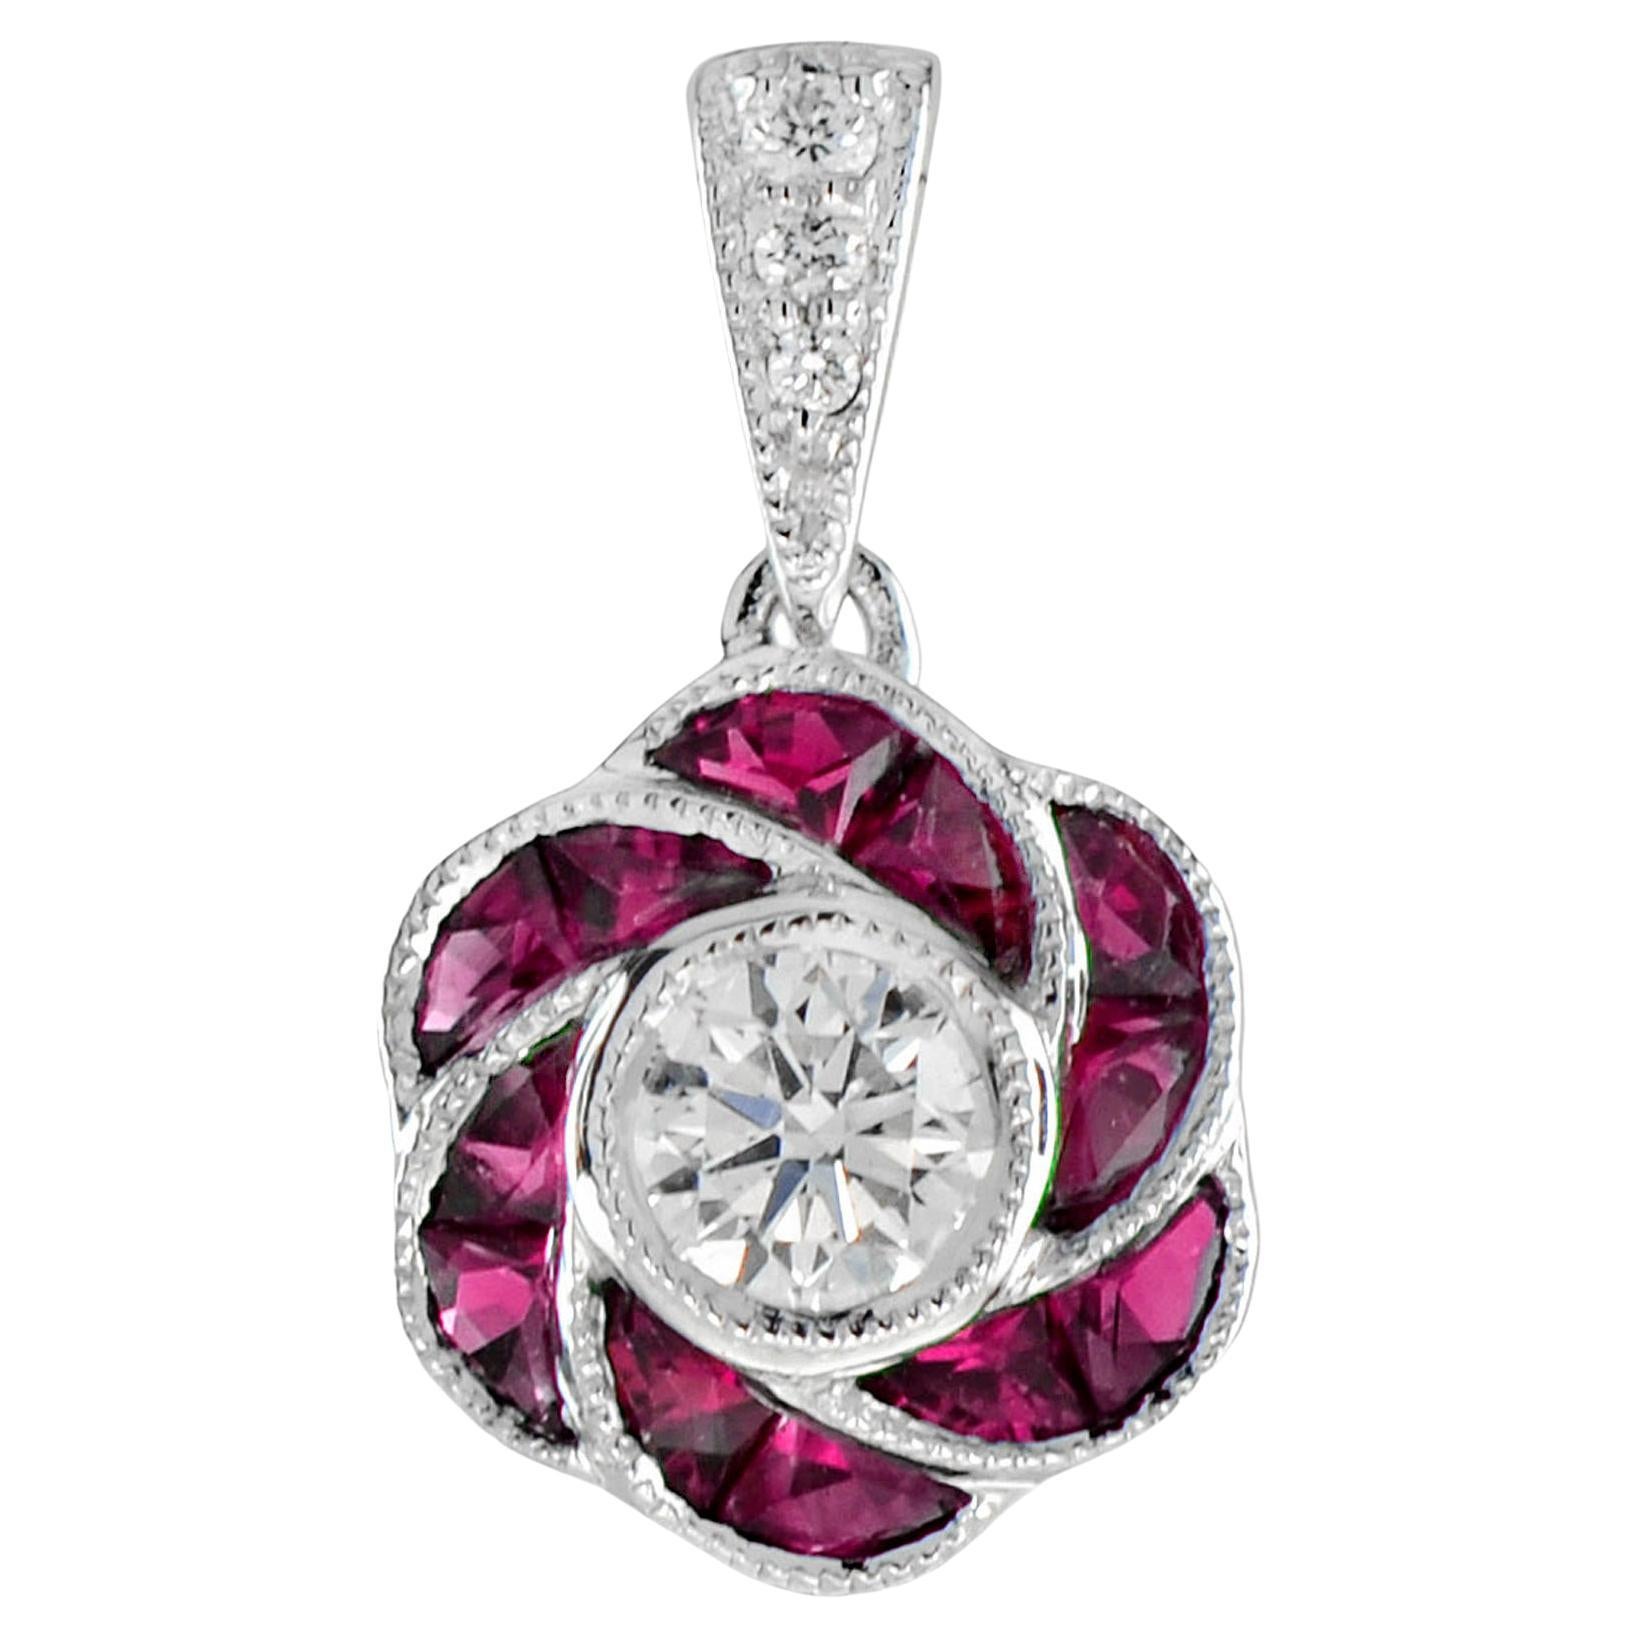 Round Diamond with Ruby Art Deco Style Floral Pendant in 18K White Gold